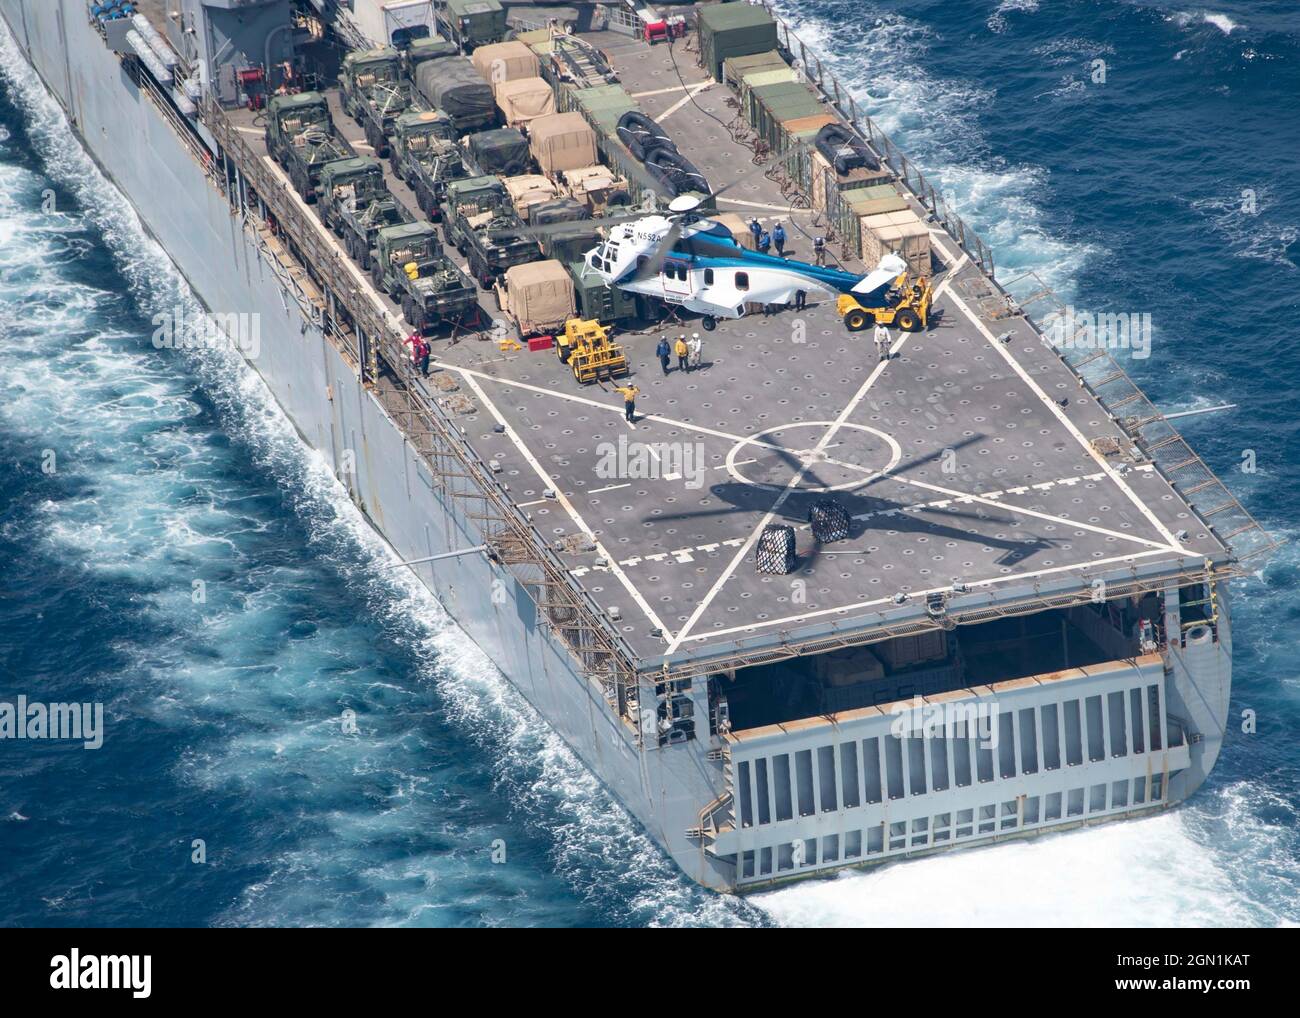 A U.S. Navy Airbus Helicopter EC225 LP Super Puma helicopter drops dry cargo and ammunition supplies from the USNS Wally Schirra, on the deck of the Harpers Ferry-class dock landing ship USS Pearl Harbor () a replenishment-at-sea with the Wasp-class amphibious assault ship USS Essex  September 18, 2021 in the Arabian Sea. Stock Photo